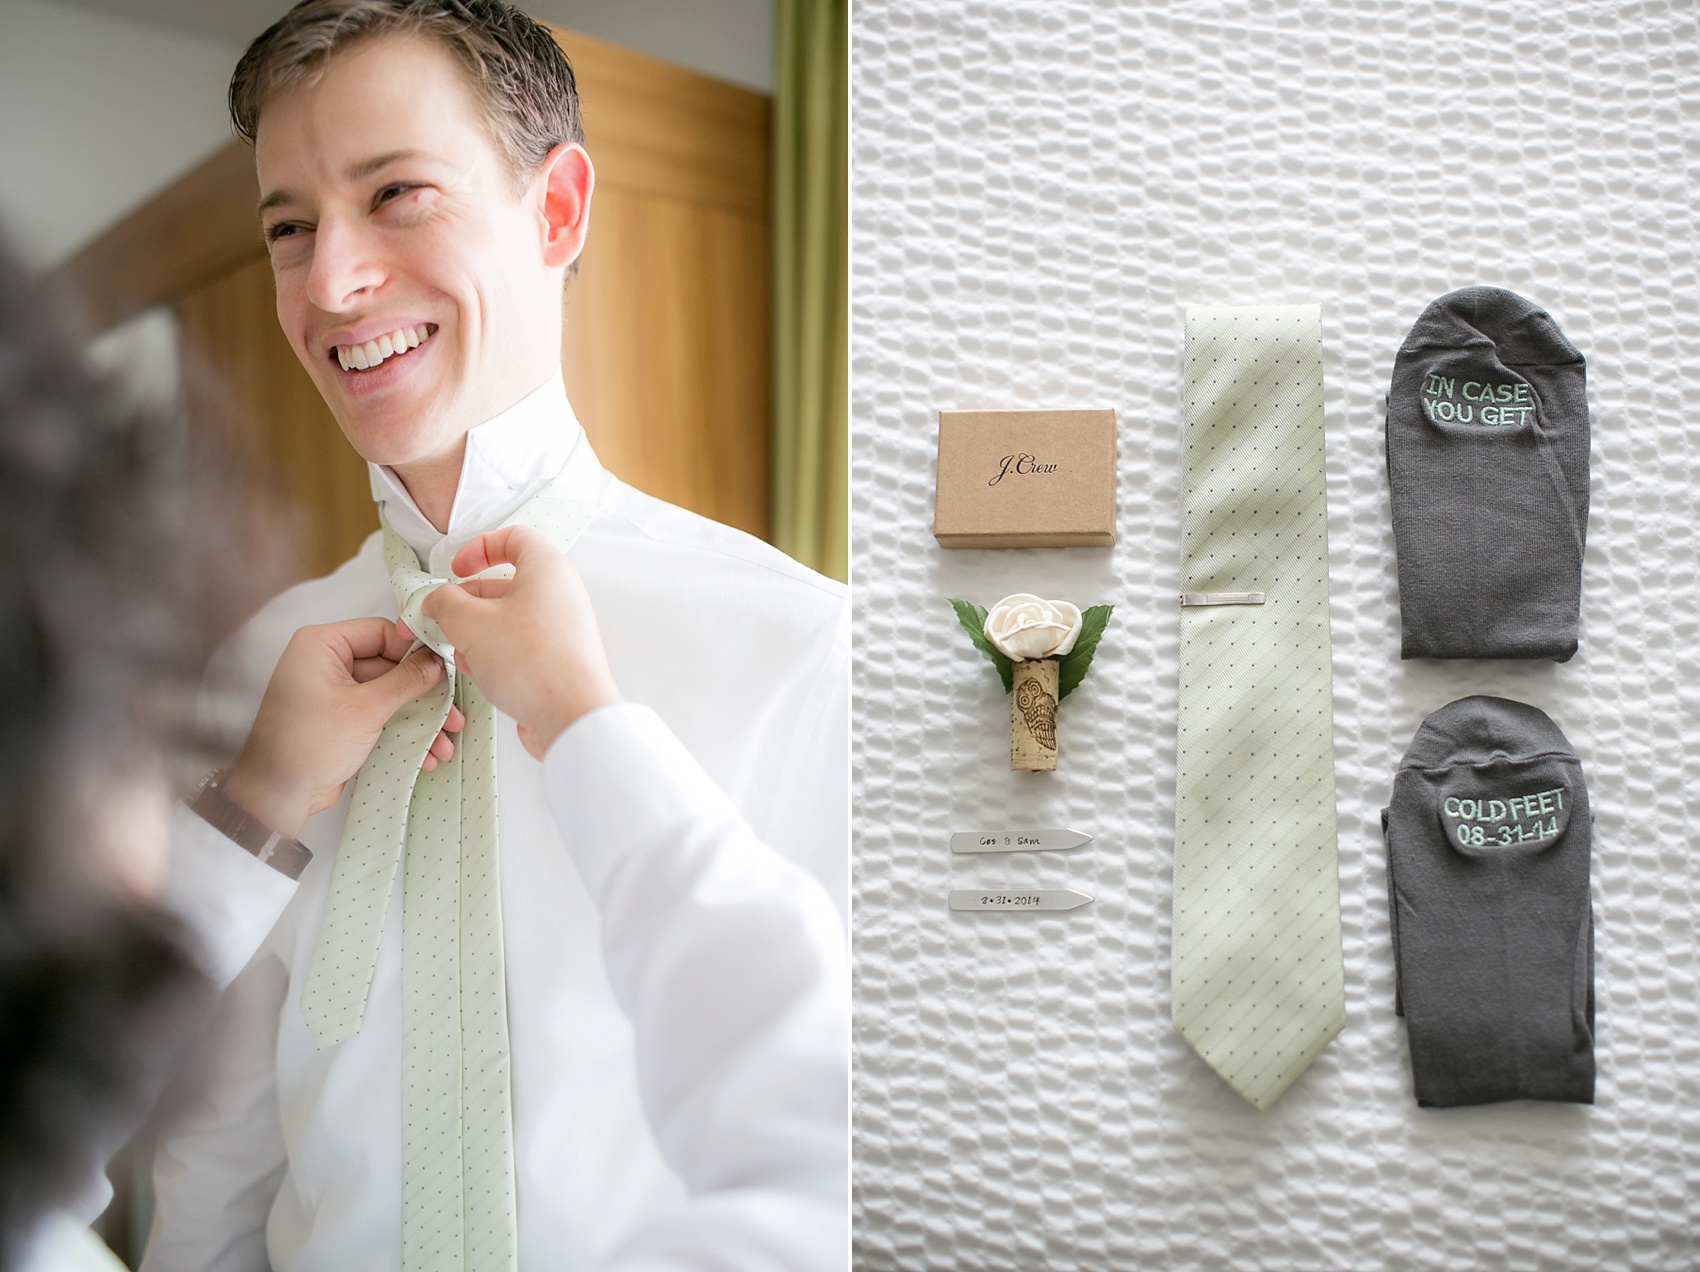 The groom prepares in his J. Crew suit and custom "cold feet" groom's socks for a summer vineyard wedding at Hopewell Valley Vineyards. Photos by New Jersey wedding photographer, Mikkel Paige Photography.